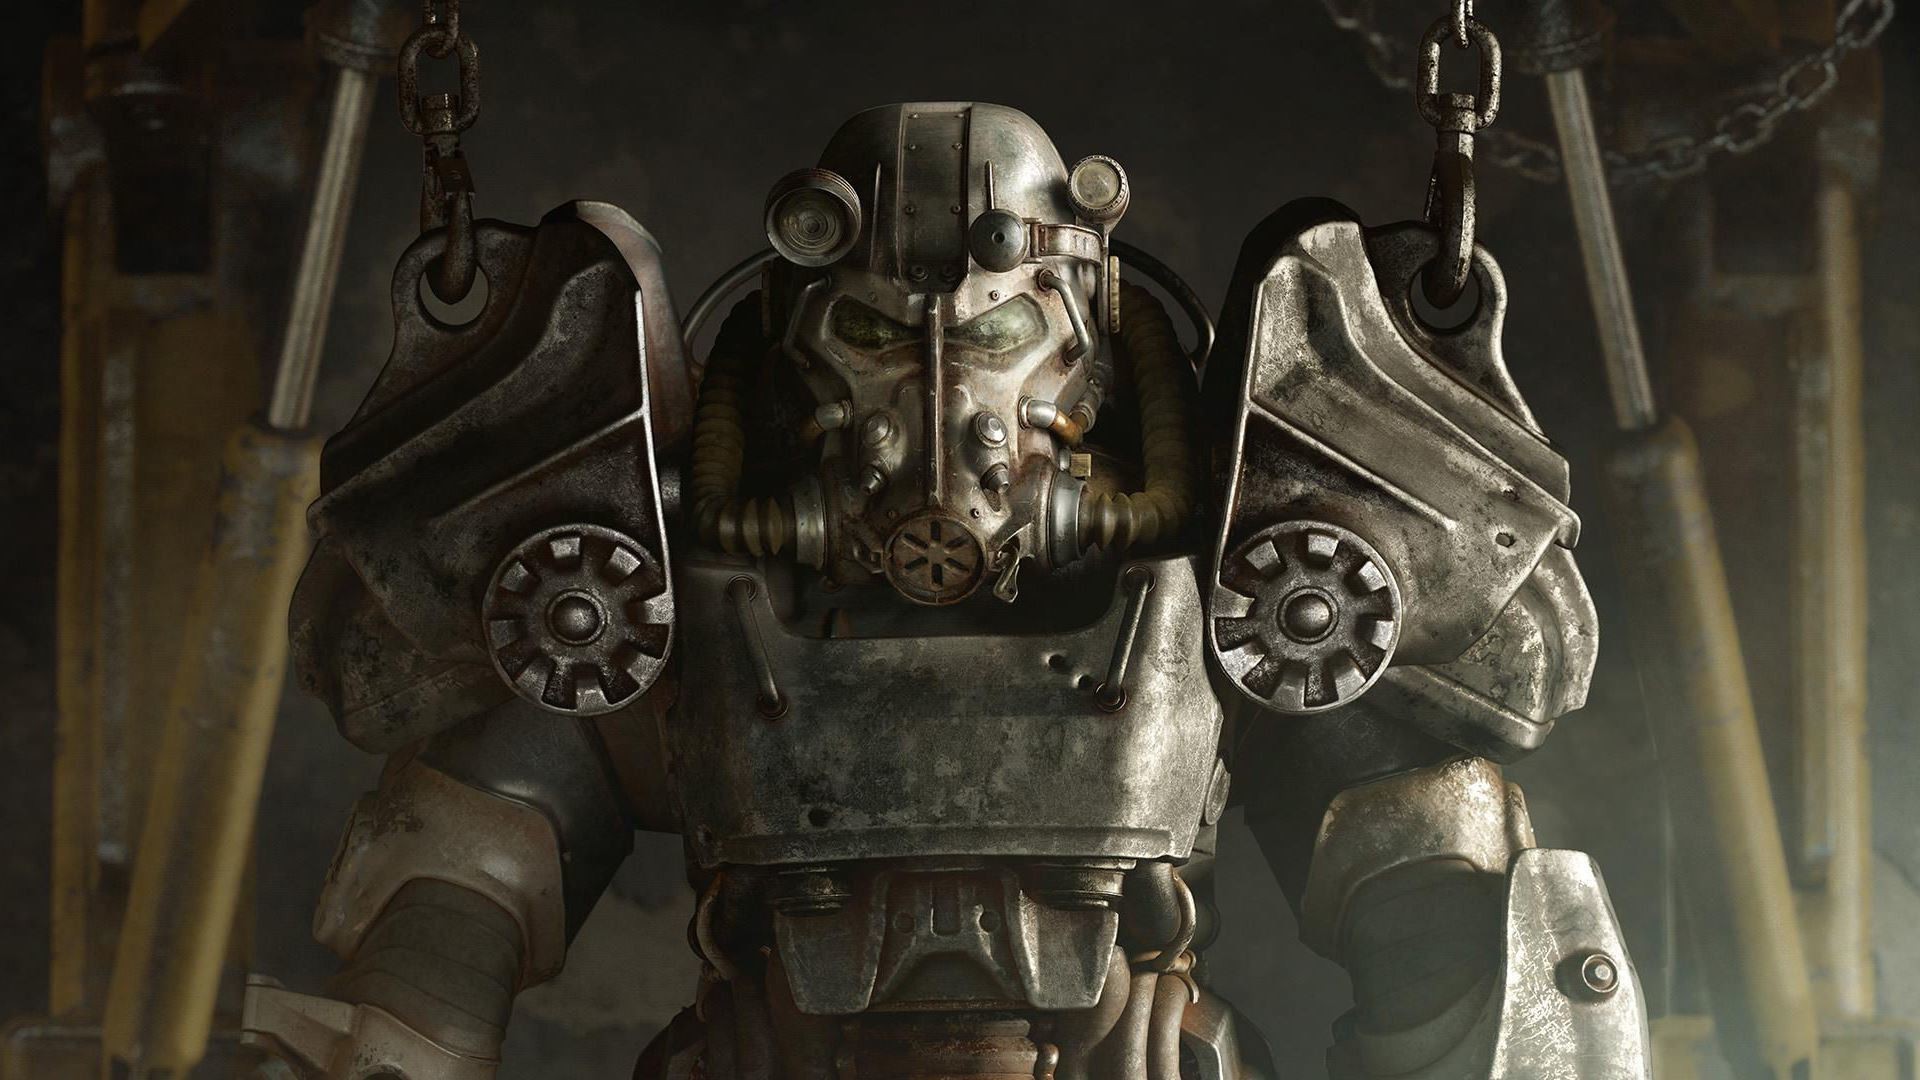 1920x1080 Fallout 4, Bethesda Softworks, Brotherhood Of Steel, Nuclear, Apocalyptic,  Video Games, Fallout Wallpapers HD / Desktop and Mobile Backgrounds